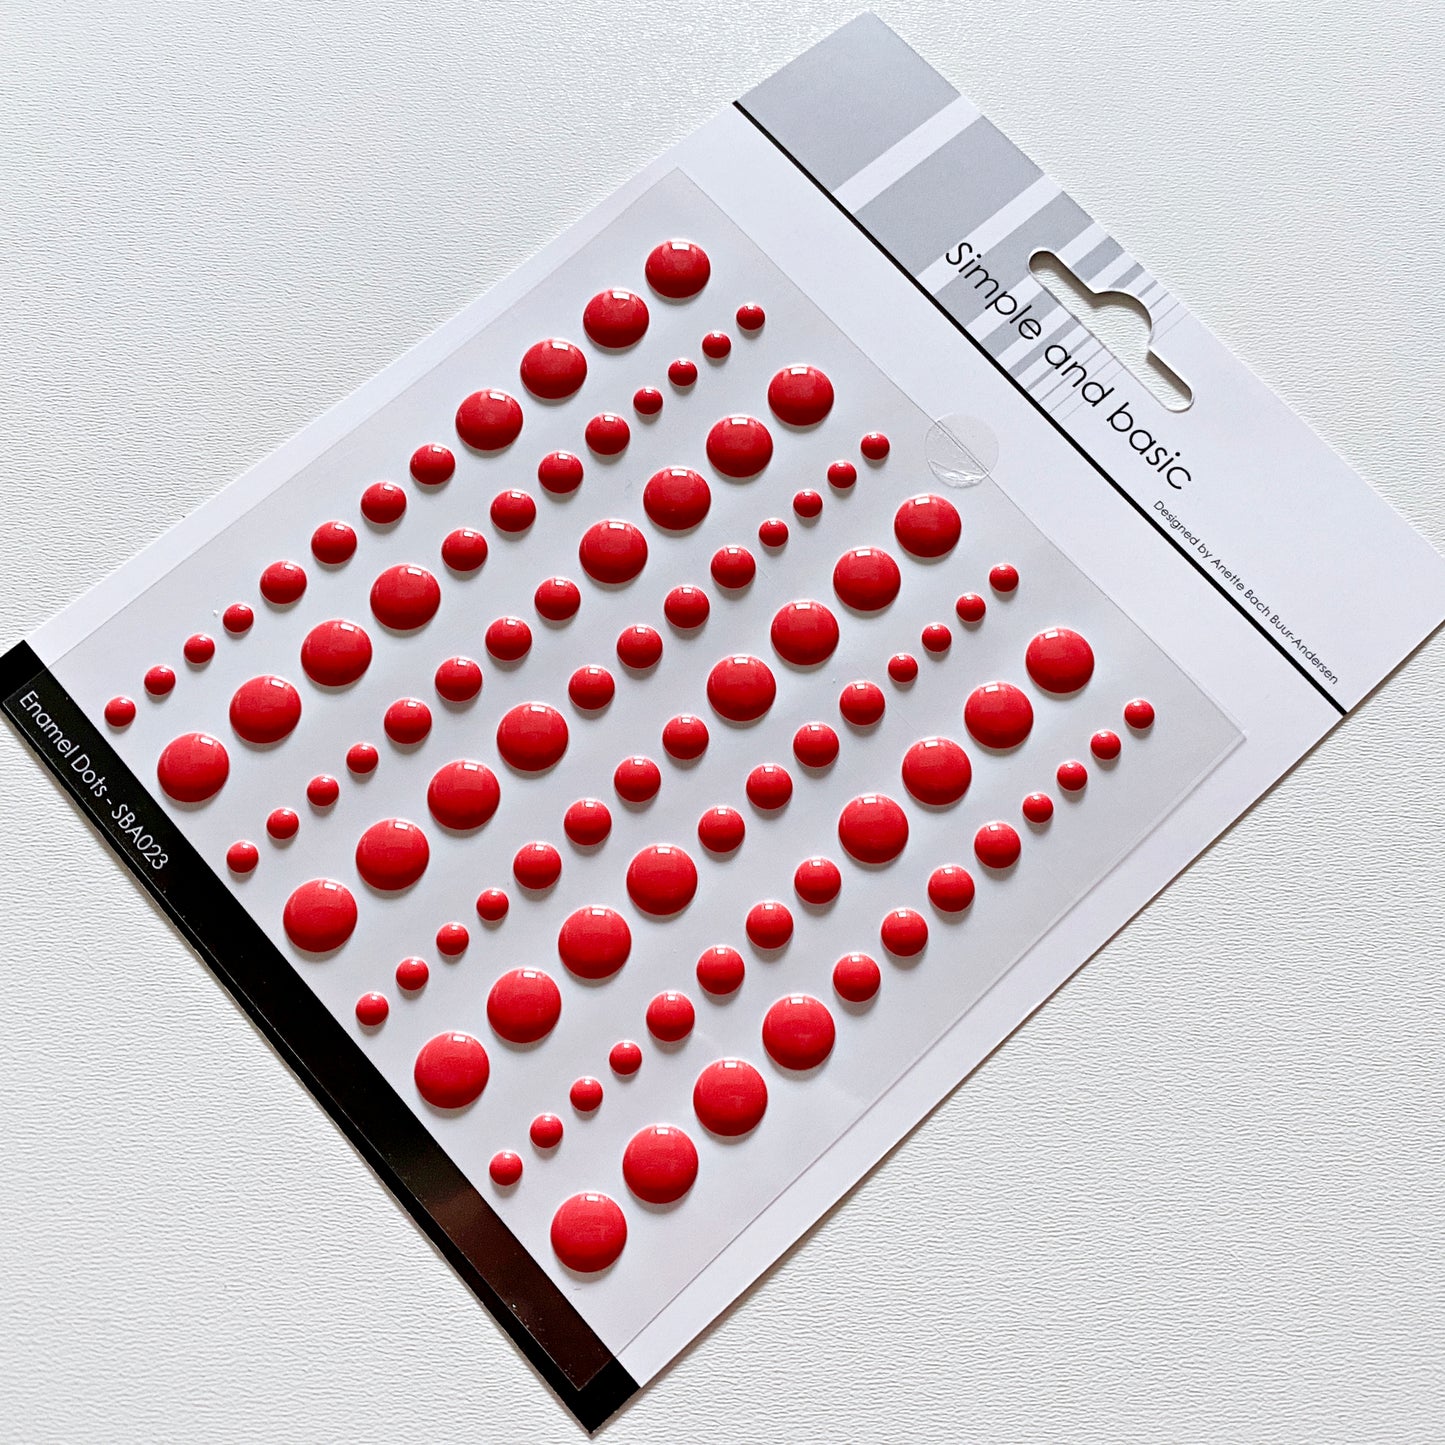 Solid Enamel Dots, 96 Pc - Calm Red